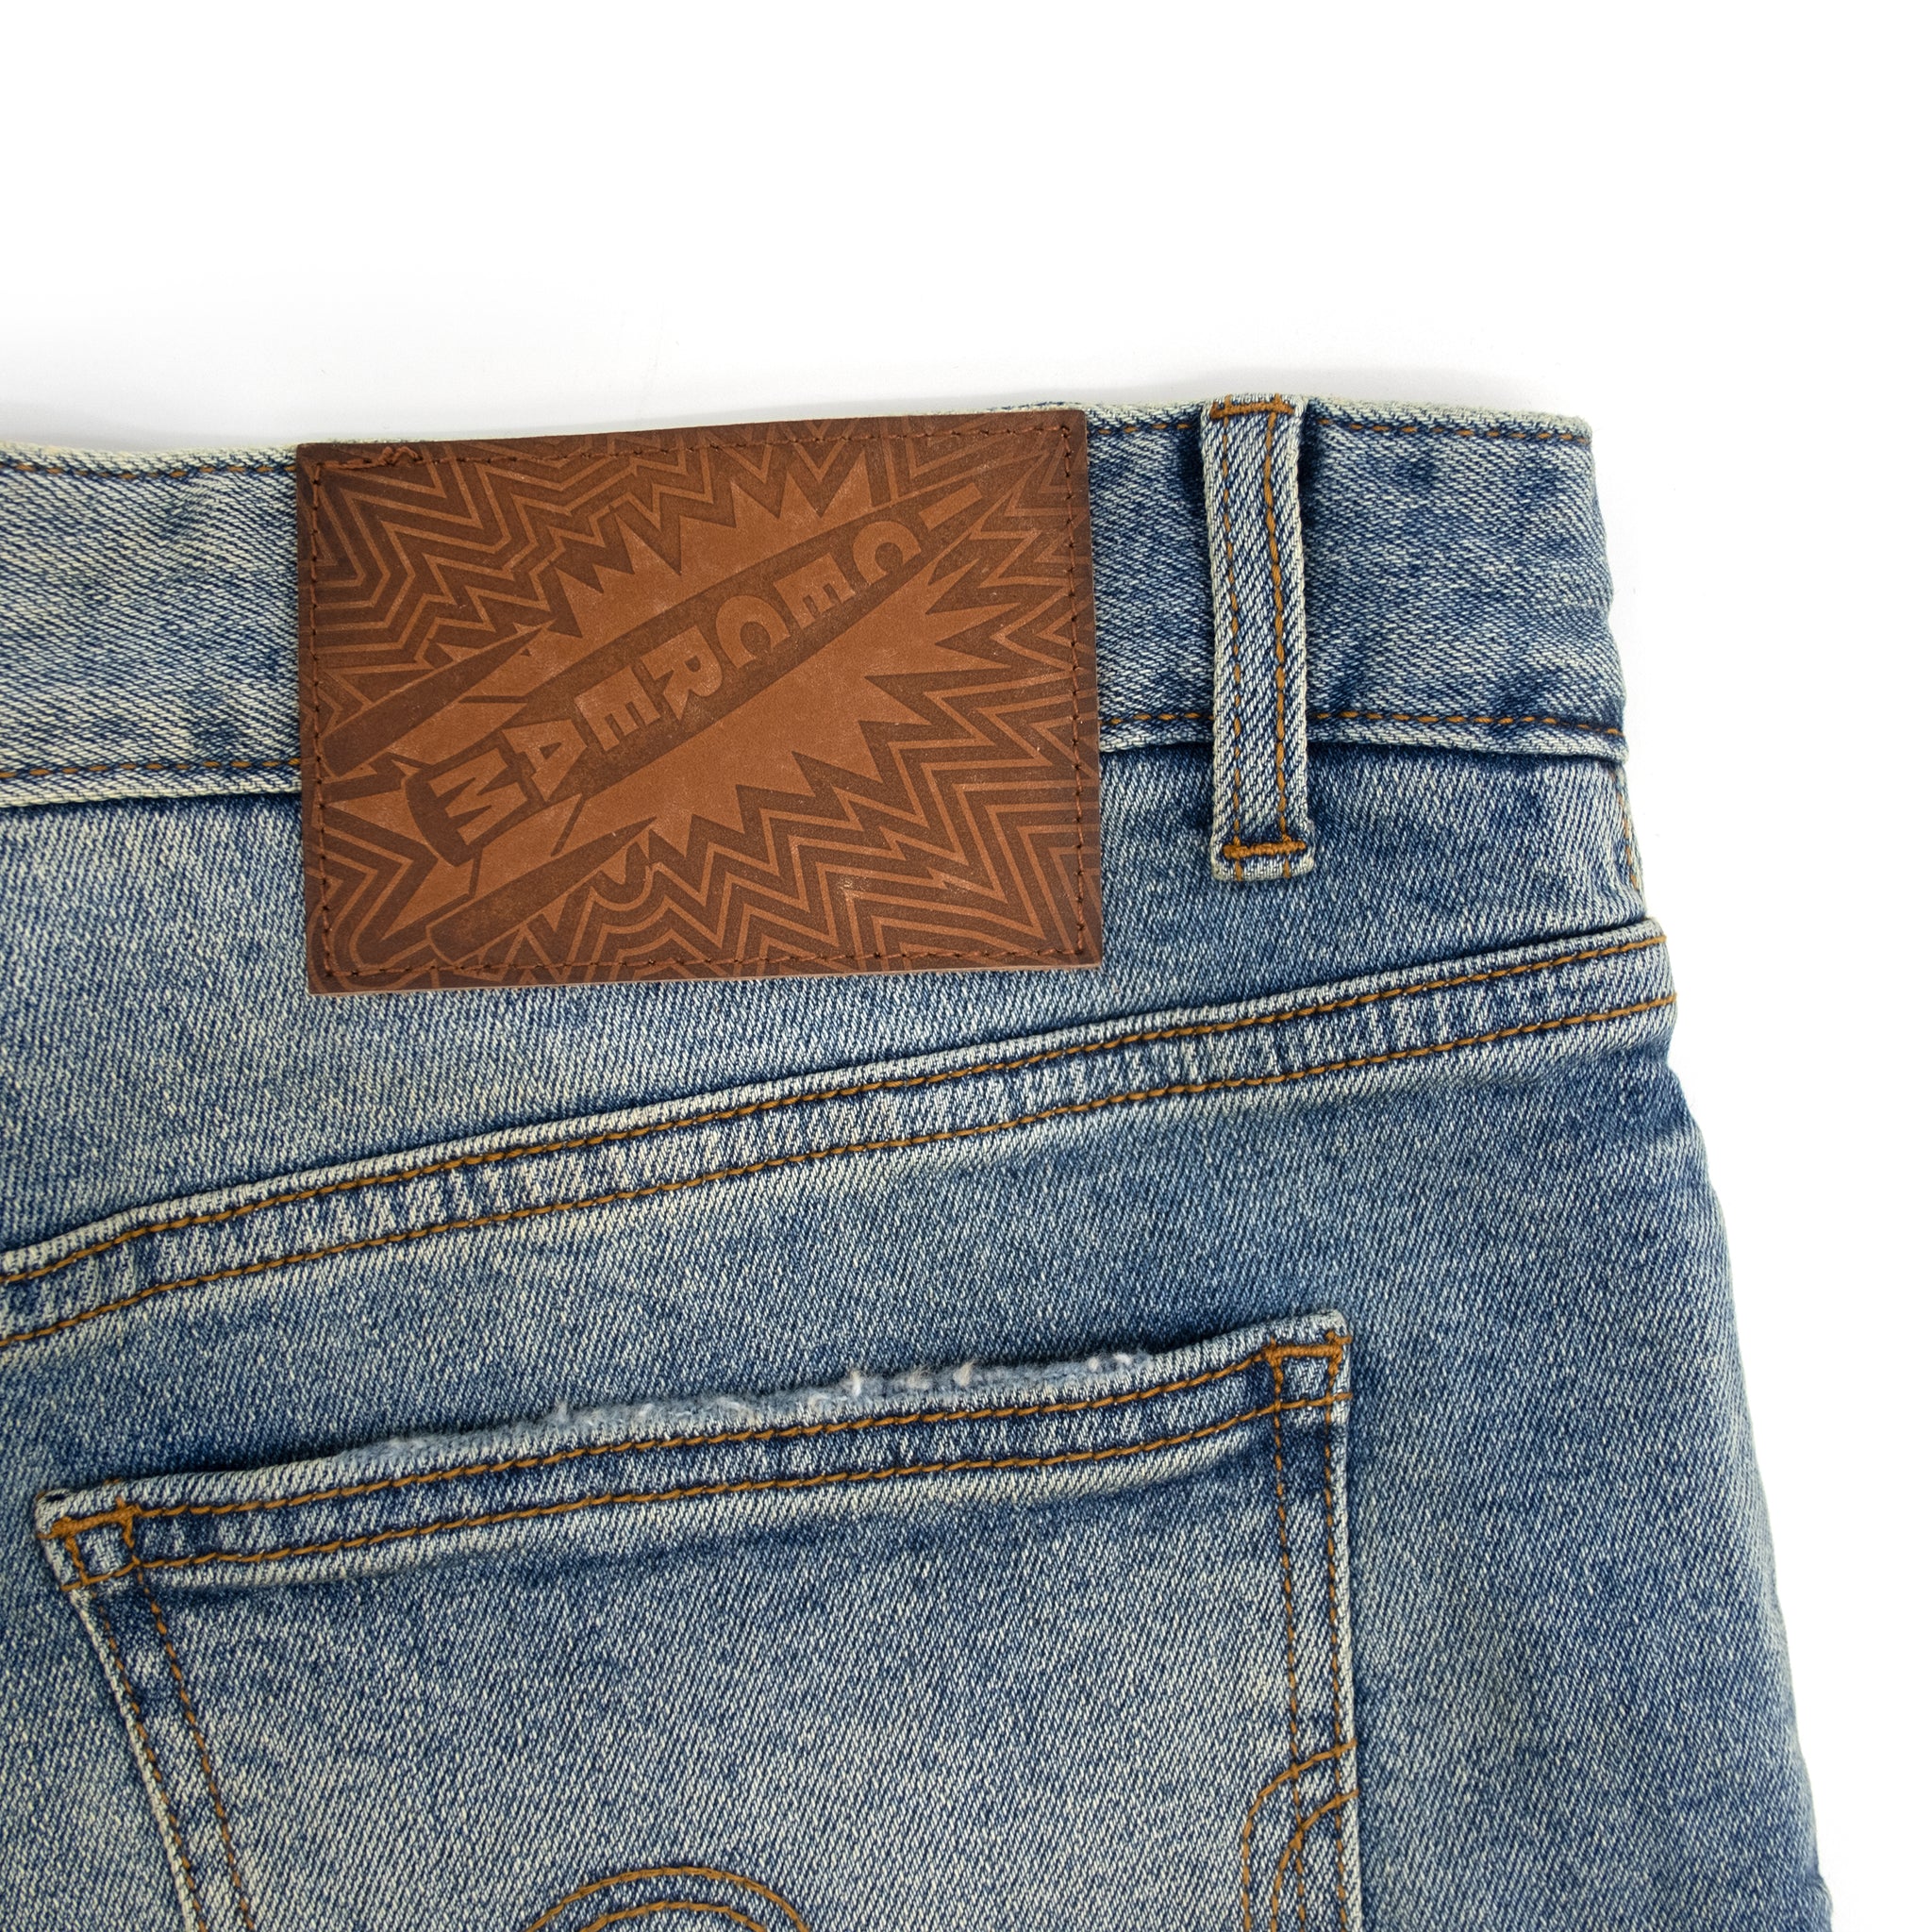 SUPERSIZE JEAN (CHOCOLATE FIT) - BLUEBERRY